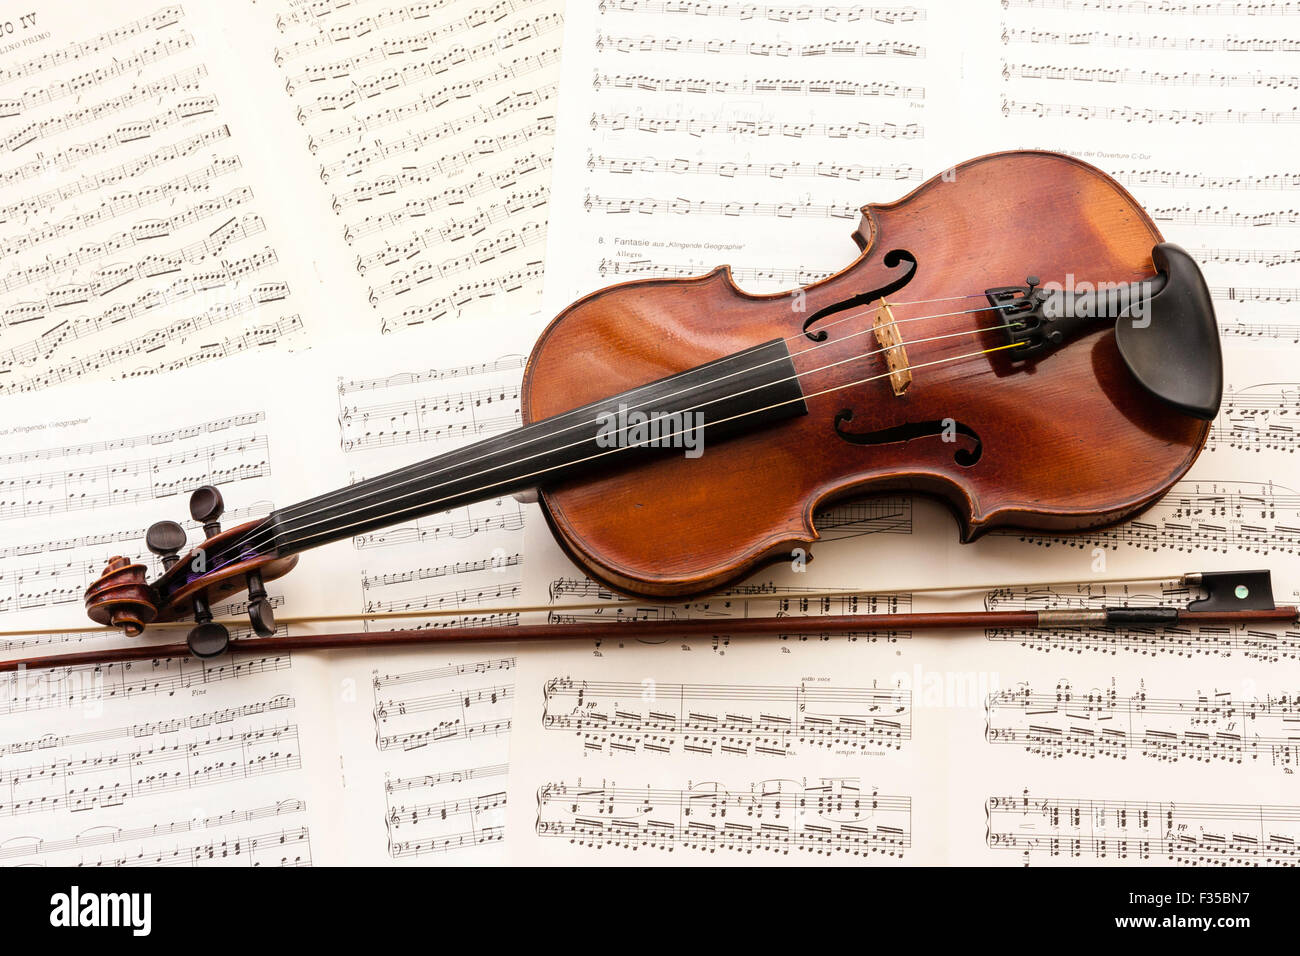 A restored violin marked Thouvenel, Paris, from circa 1800, with a vuillaume bow next to it, resting on a background of sheet music. Stock Photo